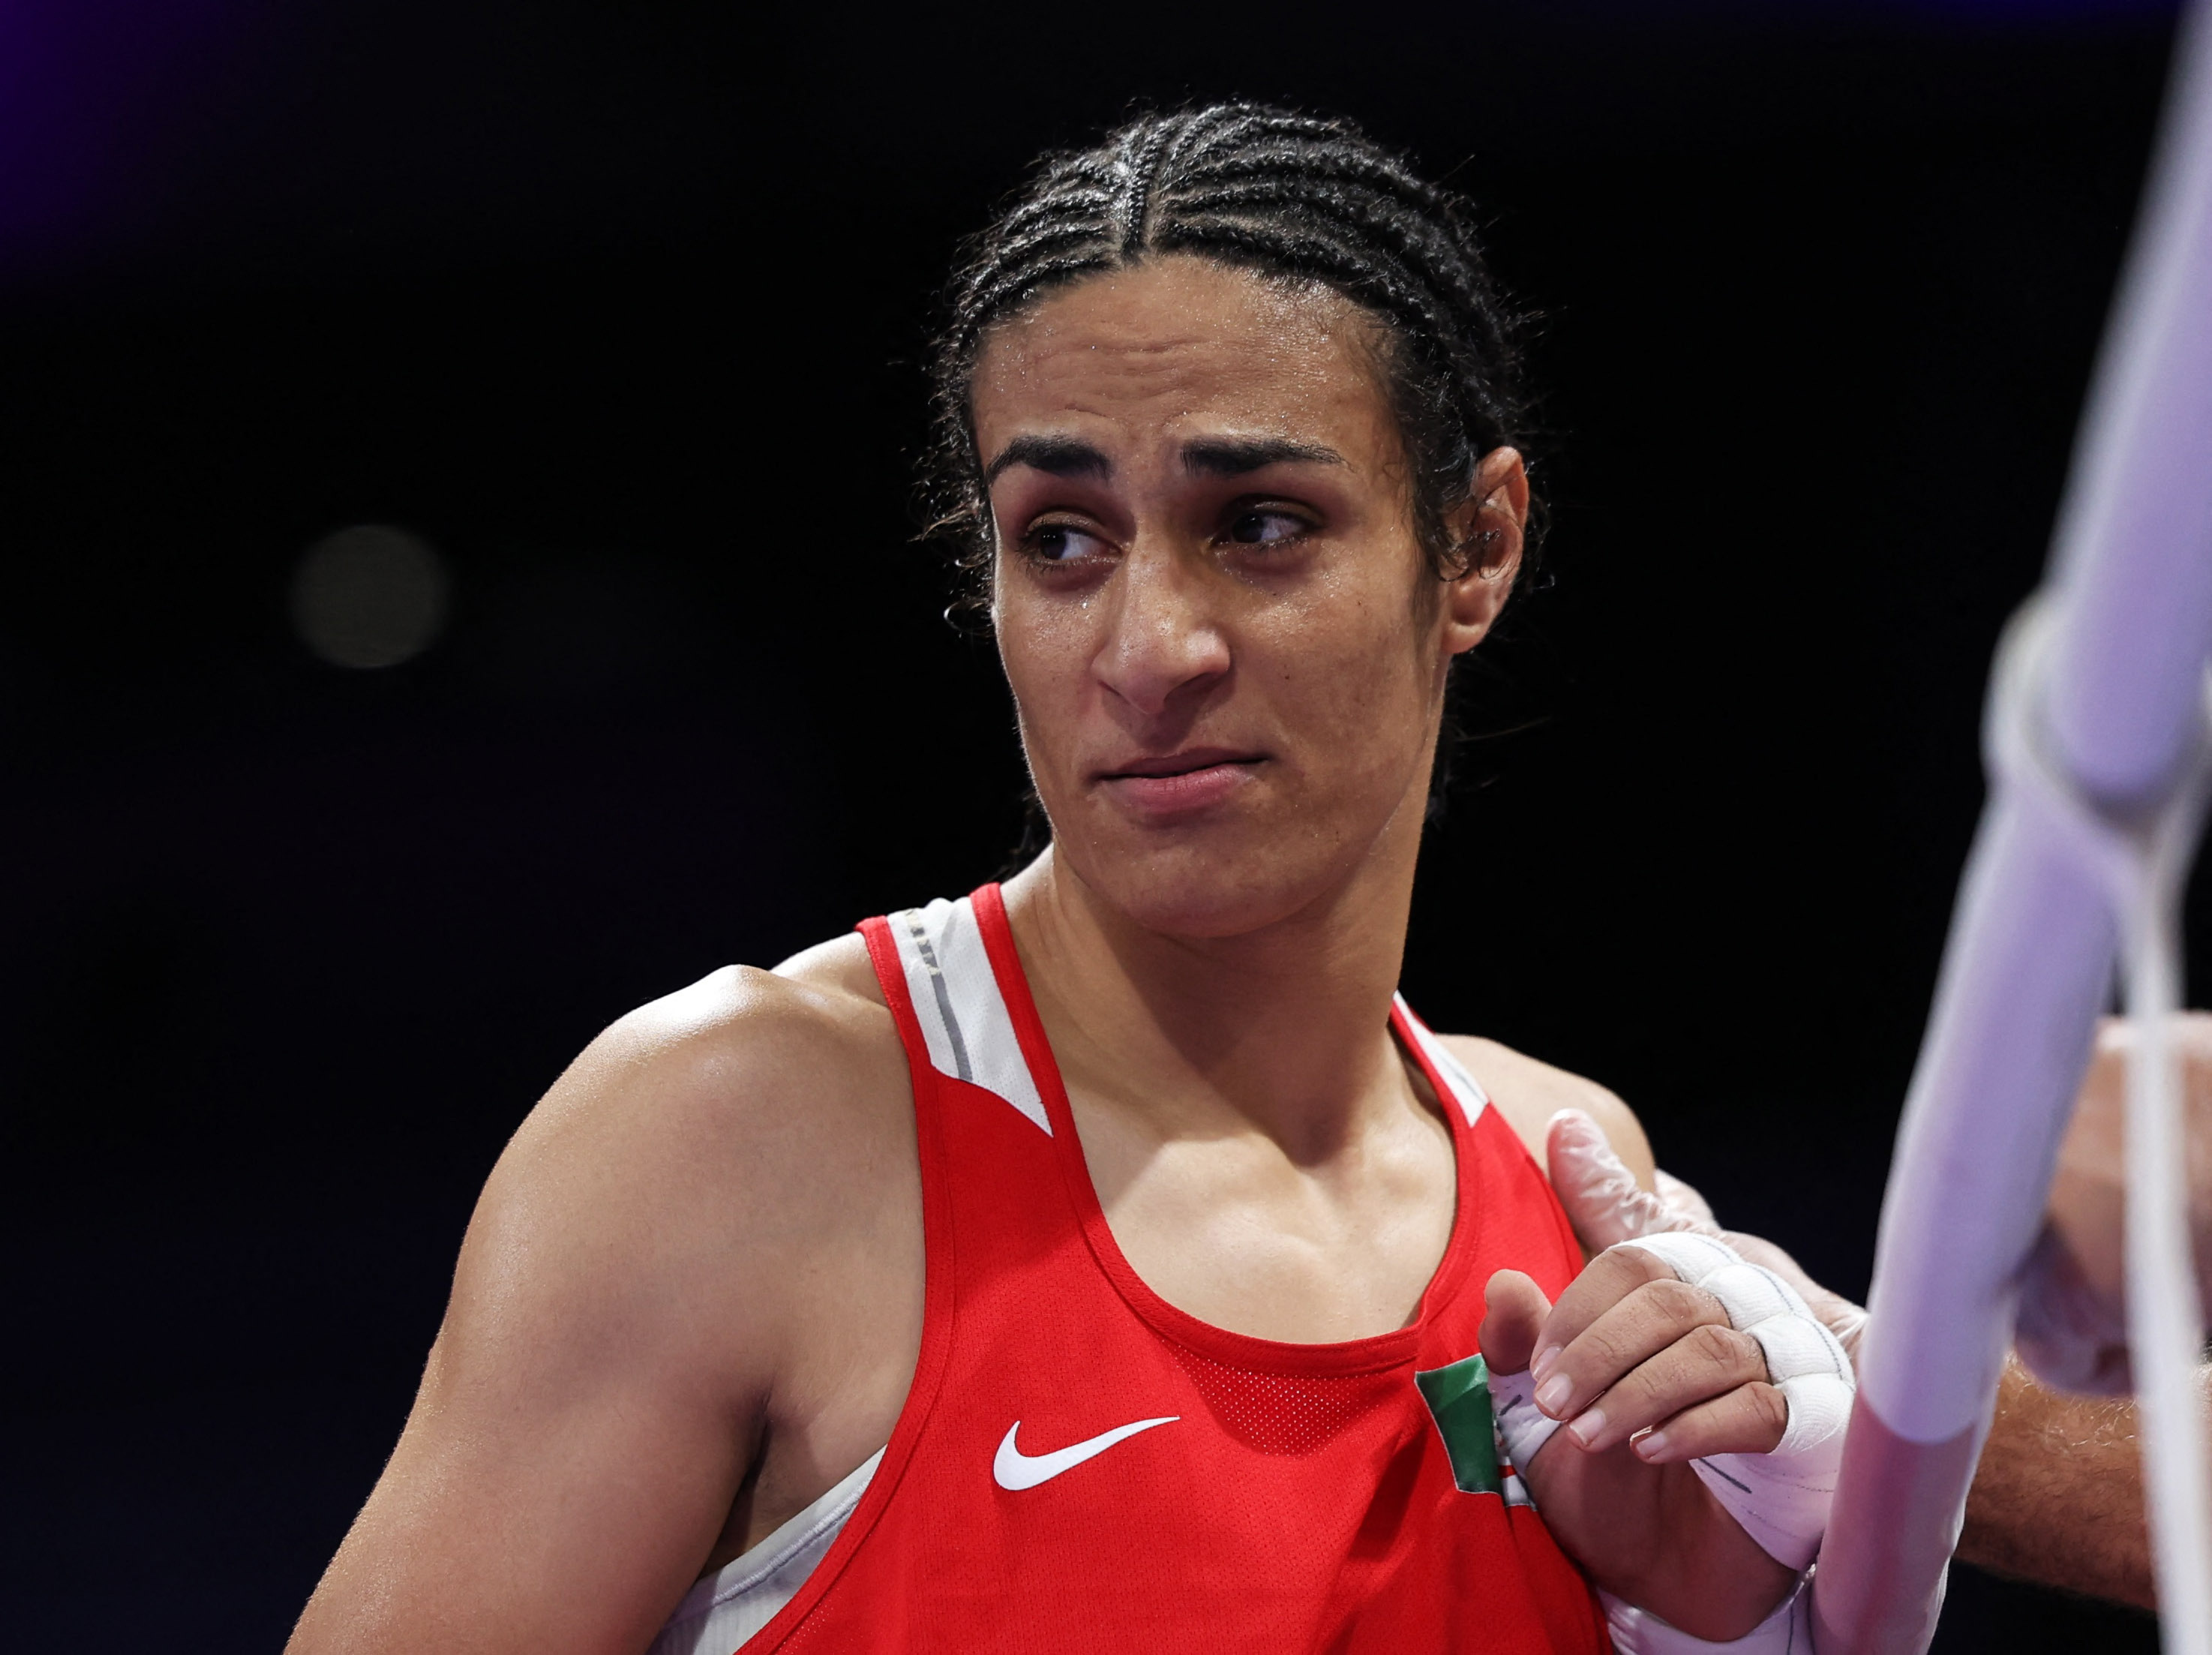 Olympics-IOC saddened by ‘aggression’ against boxers over gender row